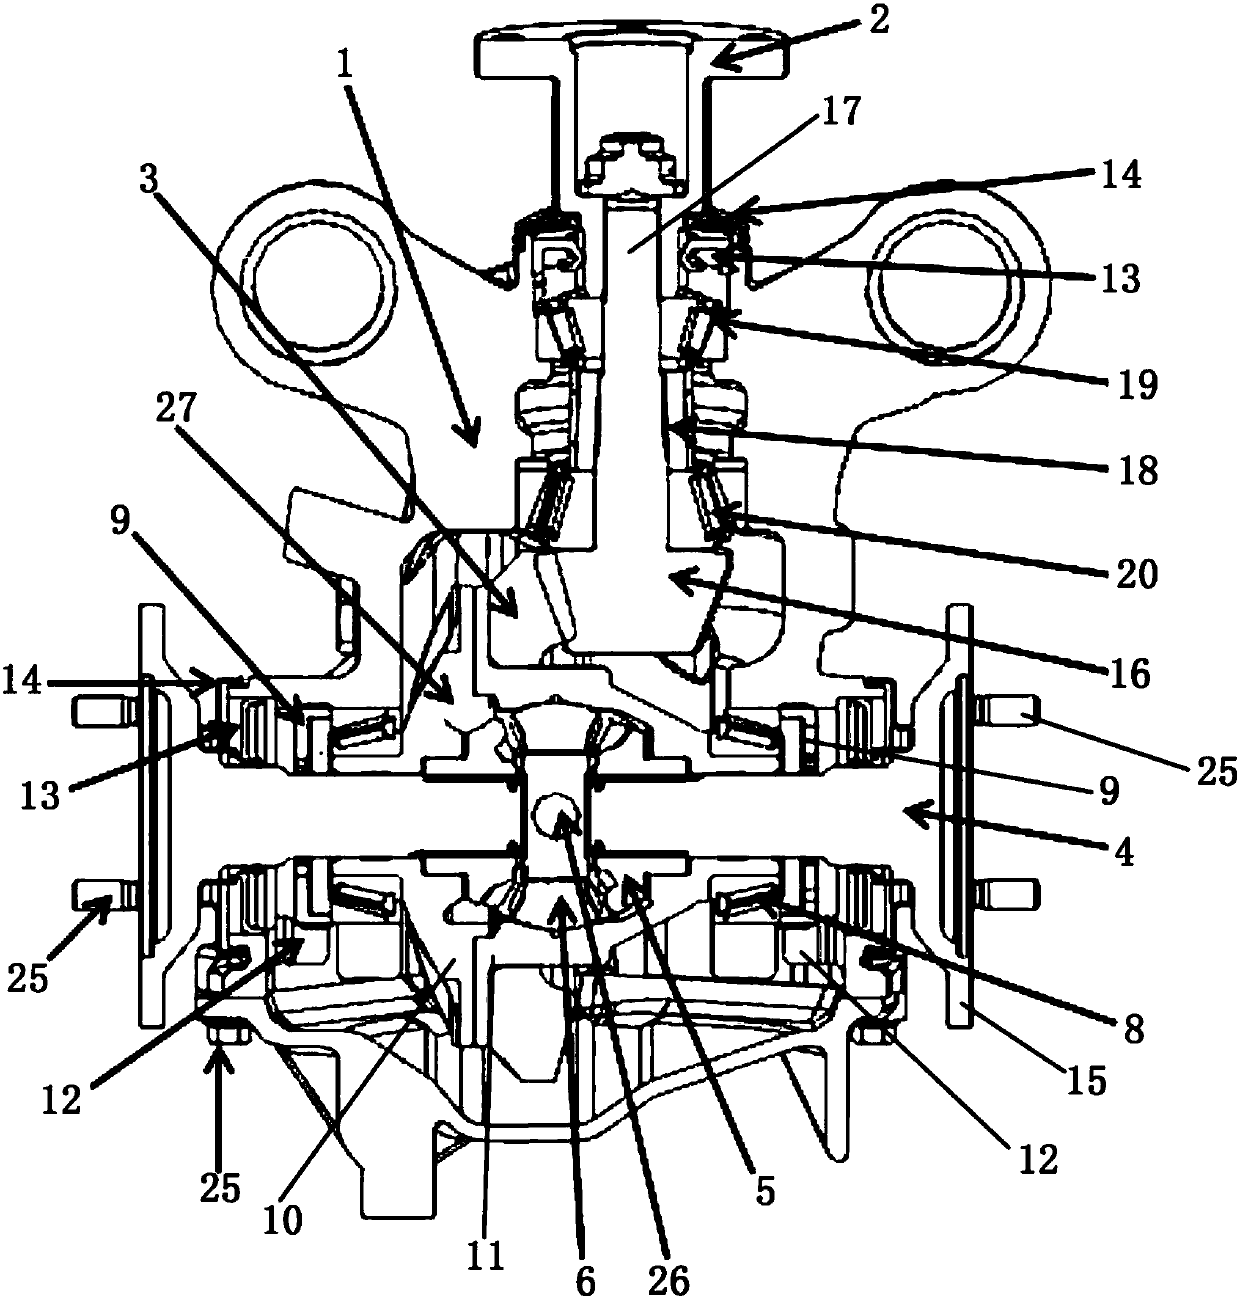 Vehicle rear independent main deceleration assembly